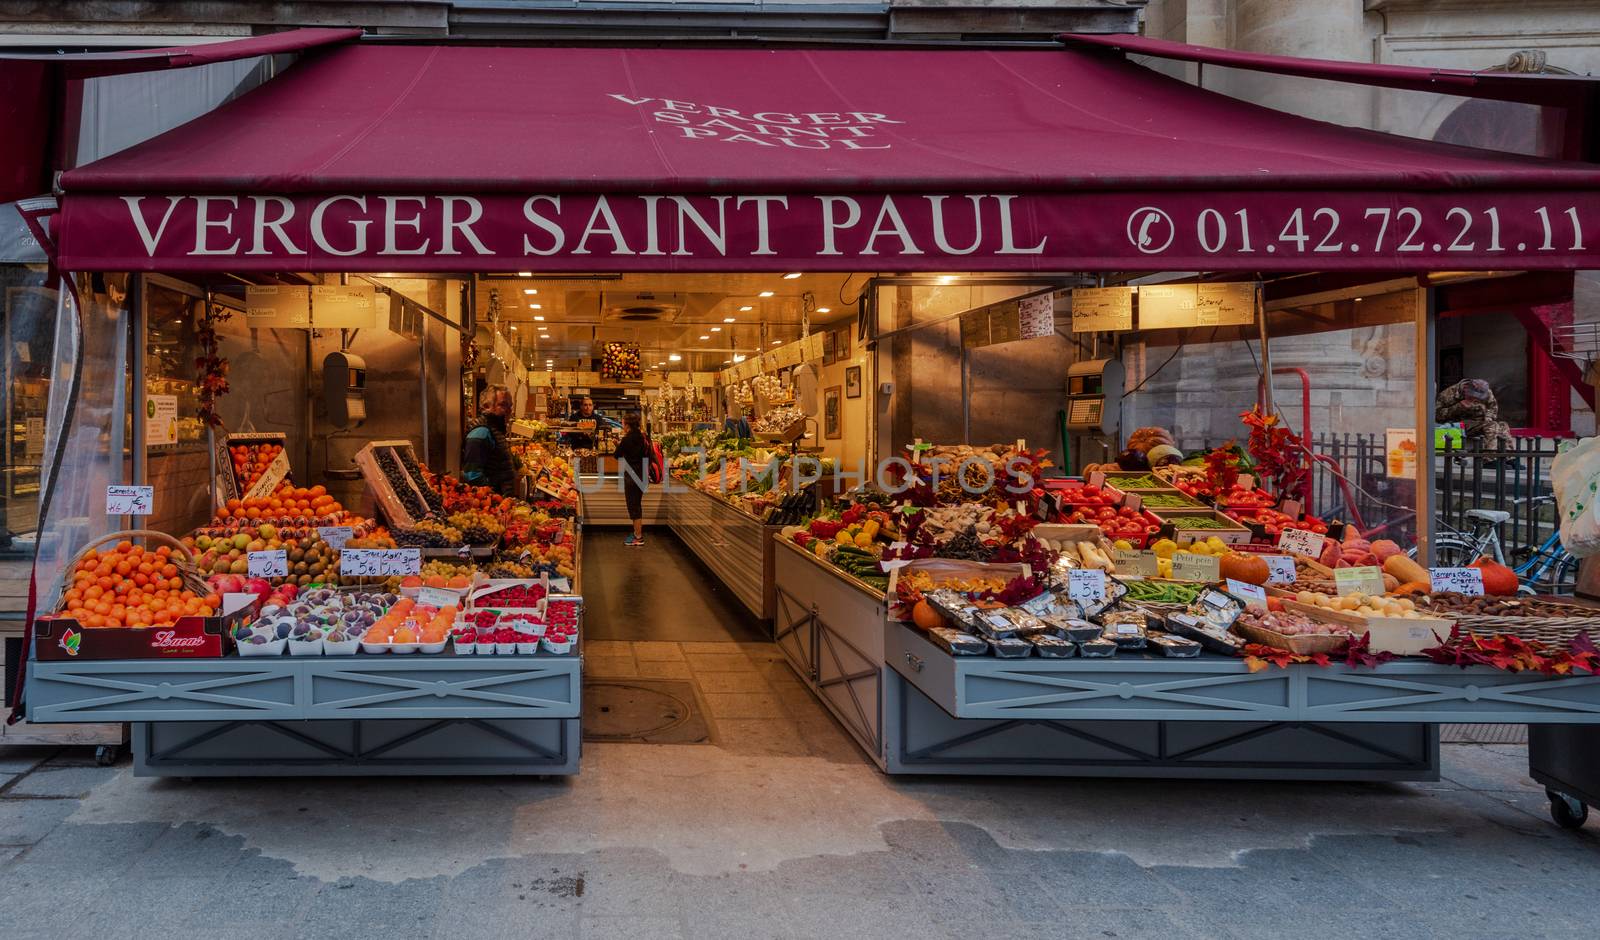 Food and Cheese Shop in Paris by jfbenning